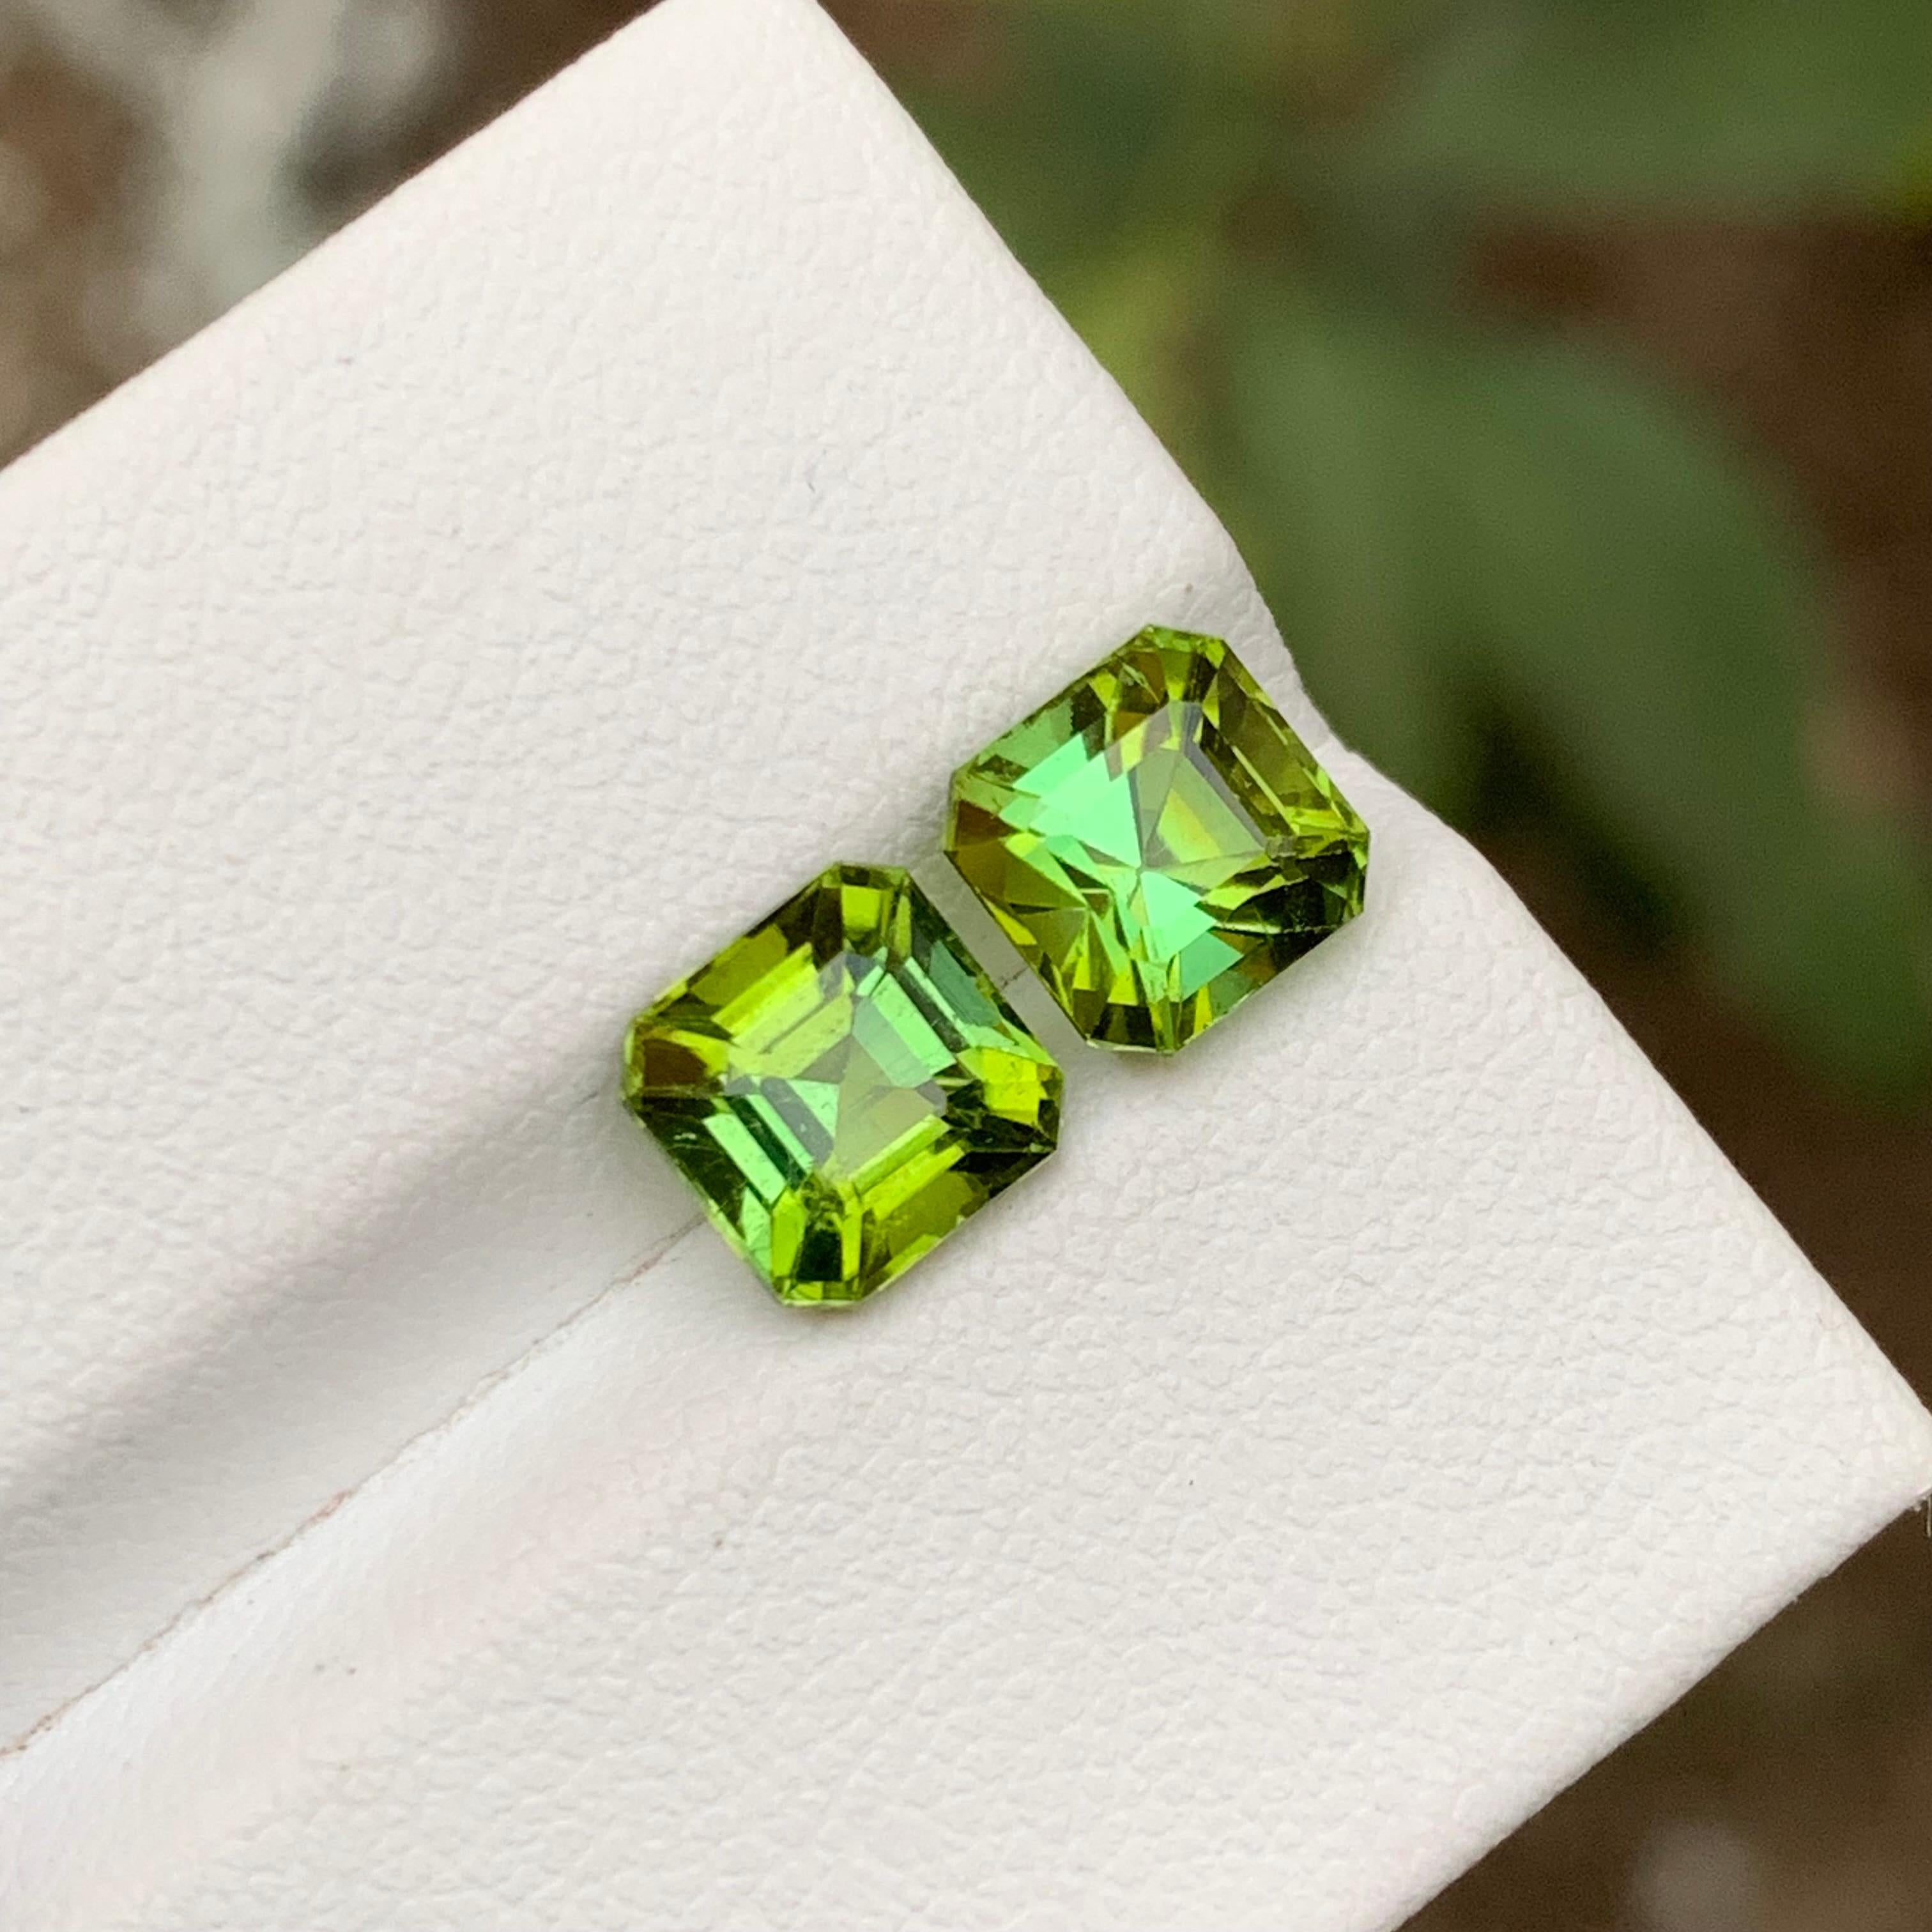 Contemporary Rare Lagoon Yellowish Green Tourmaline Gemstones 3.60Ct Asscher Cut for Earrings For Sale